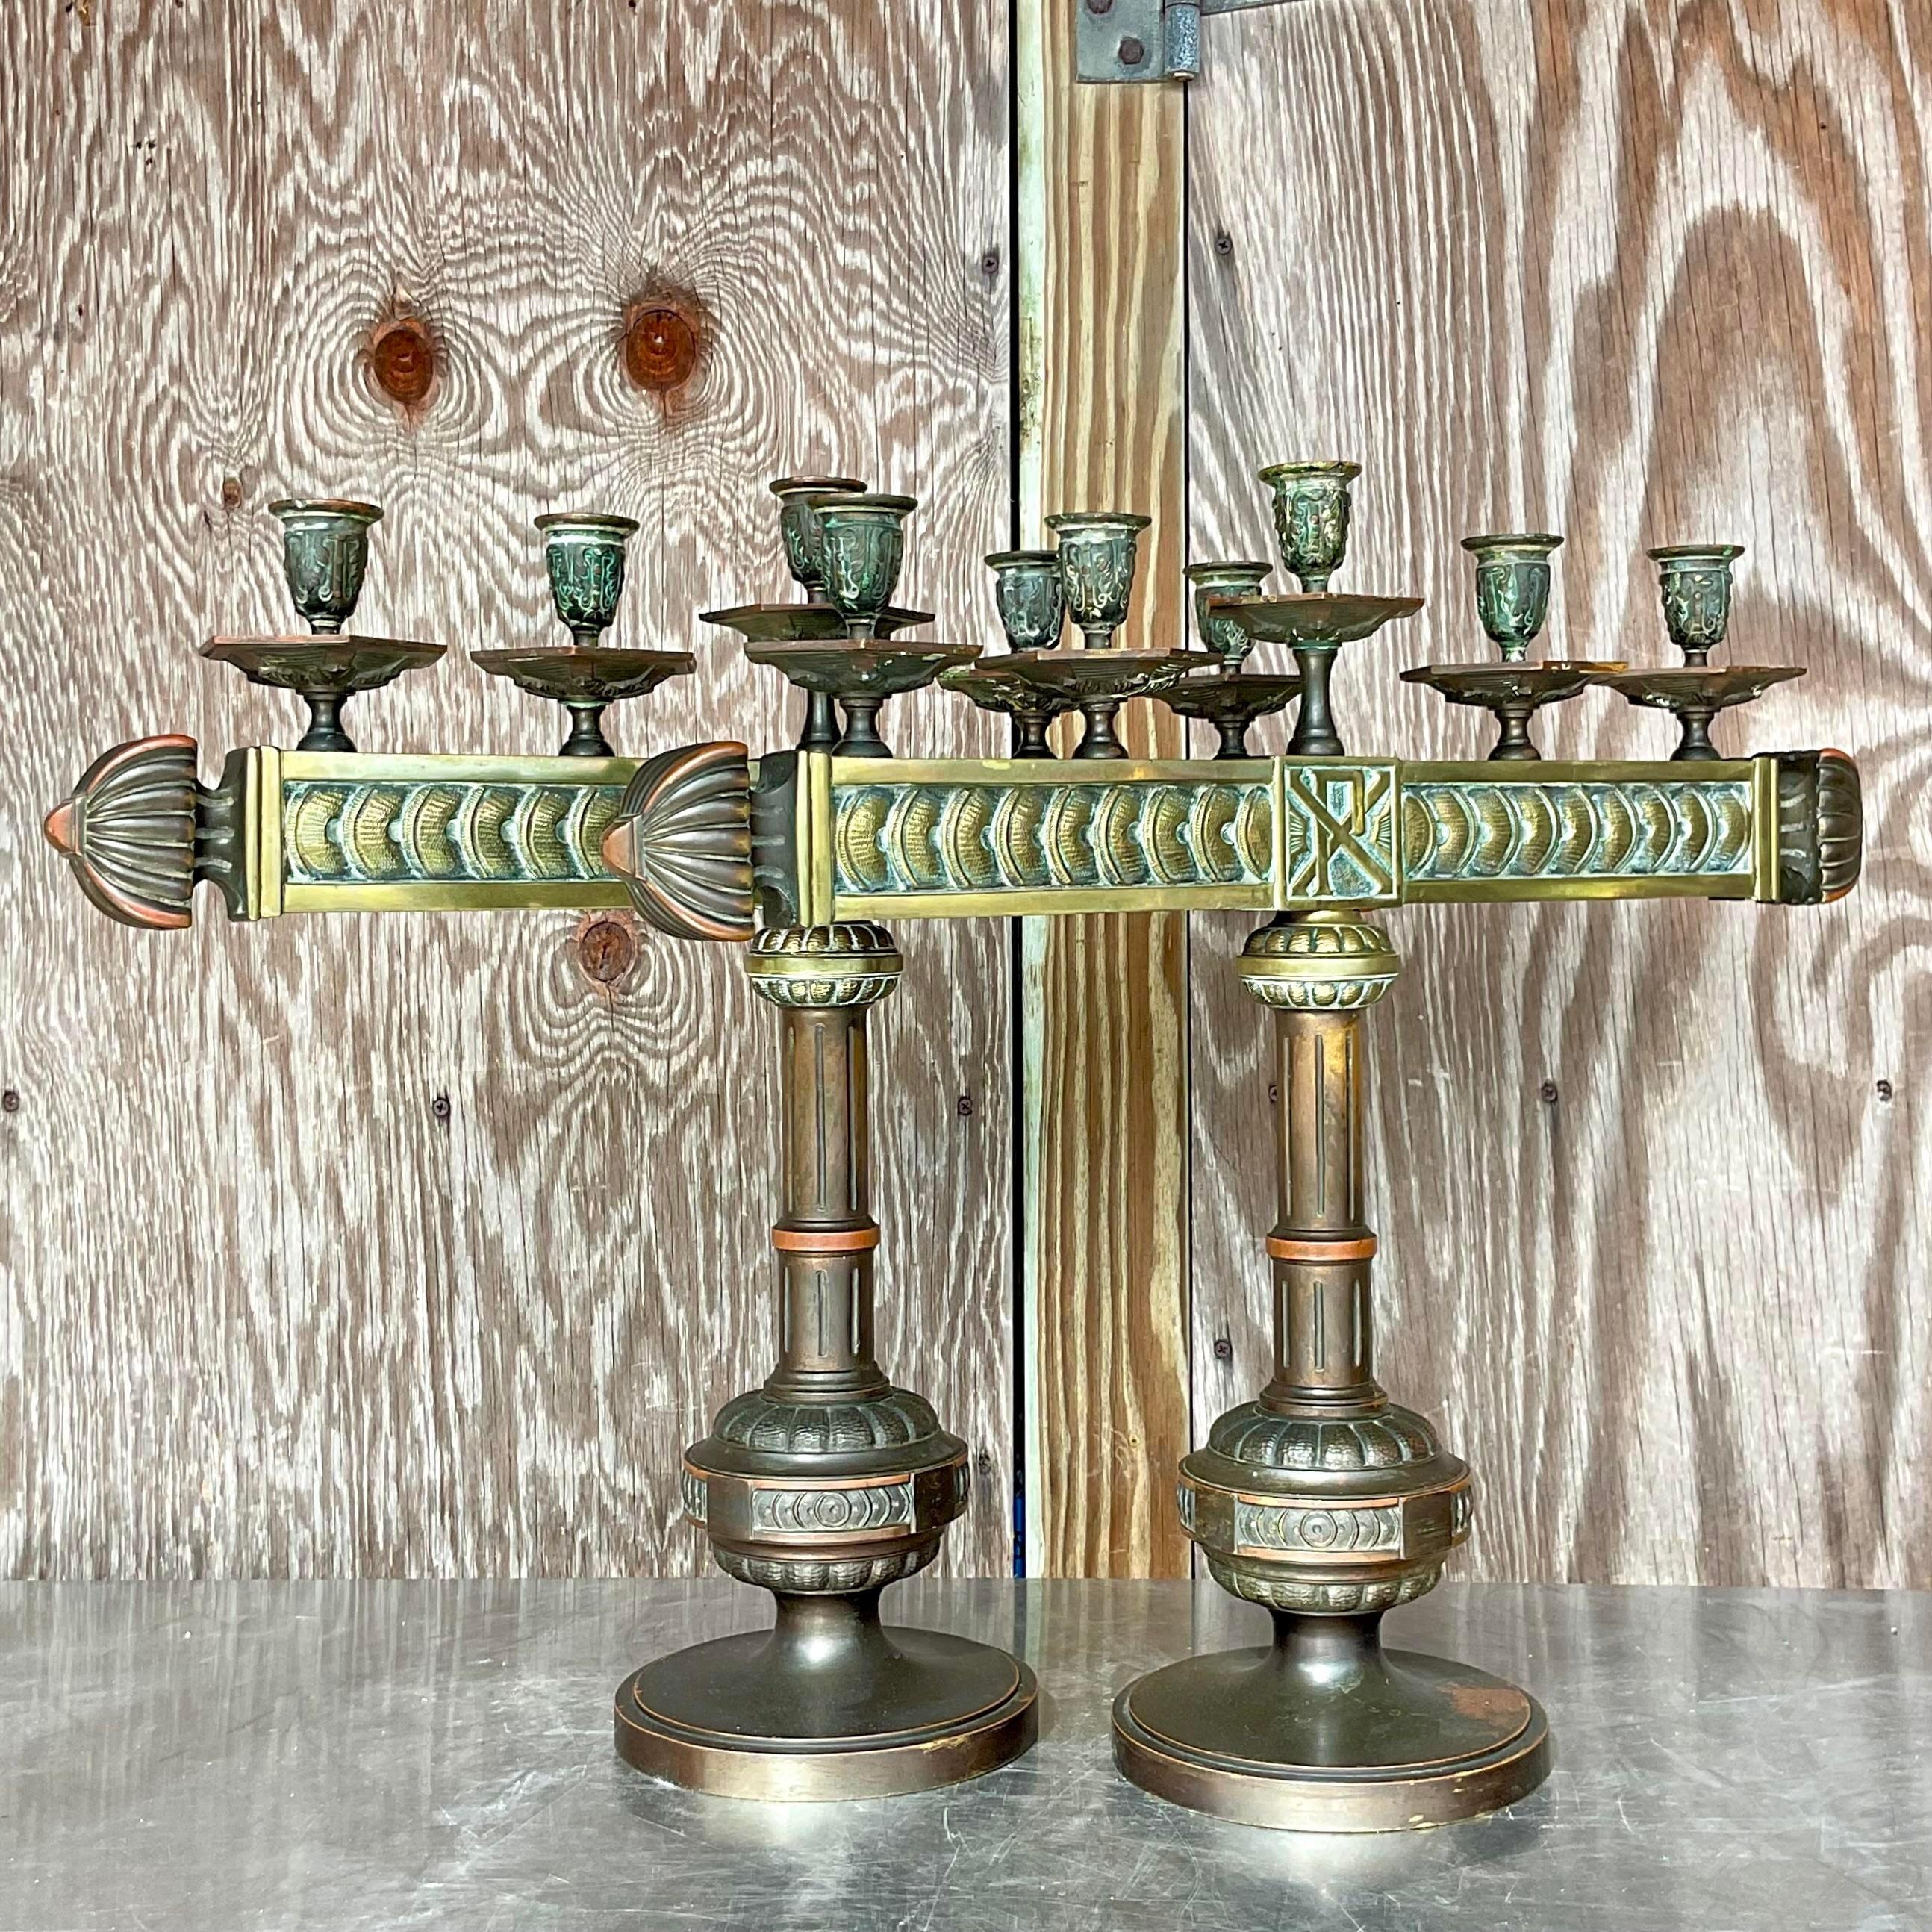 A fantastic pair of vintage Boho candelabras. Incredible rich detail on these heavy bronze masterpieces. Sure to add a flash of chicness to any space. Acquired from a Palm Beach estate